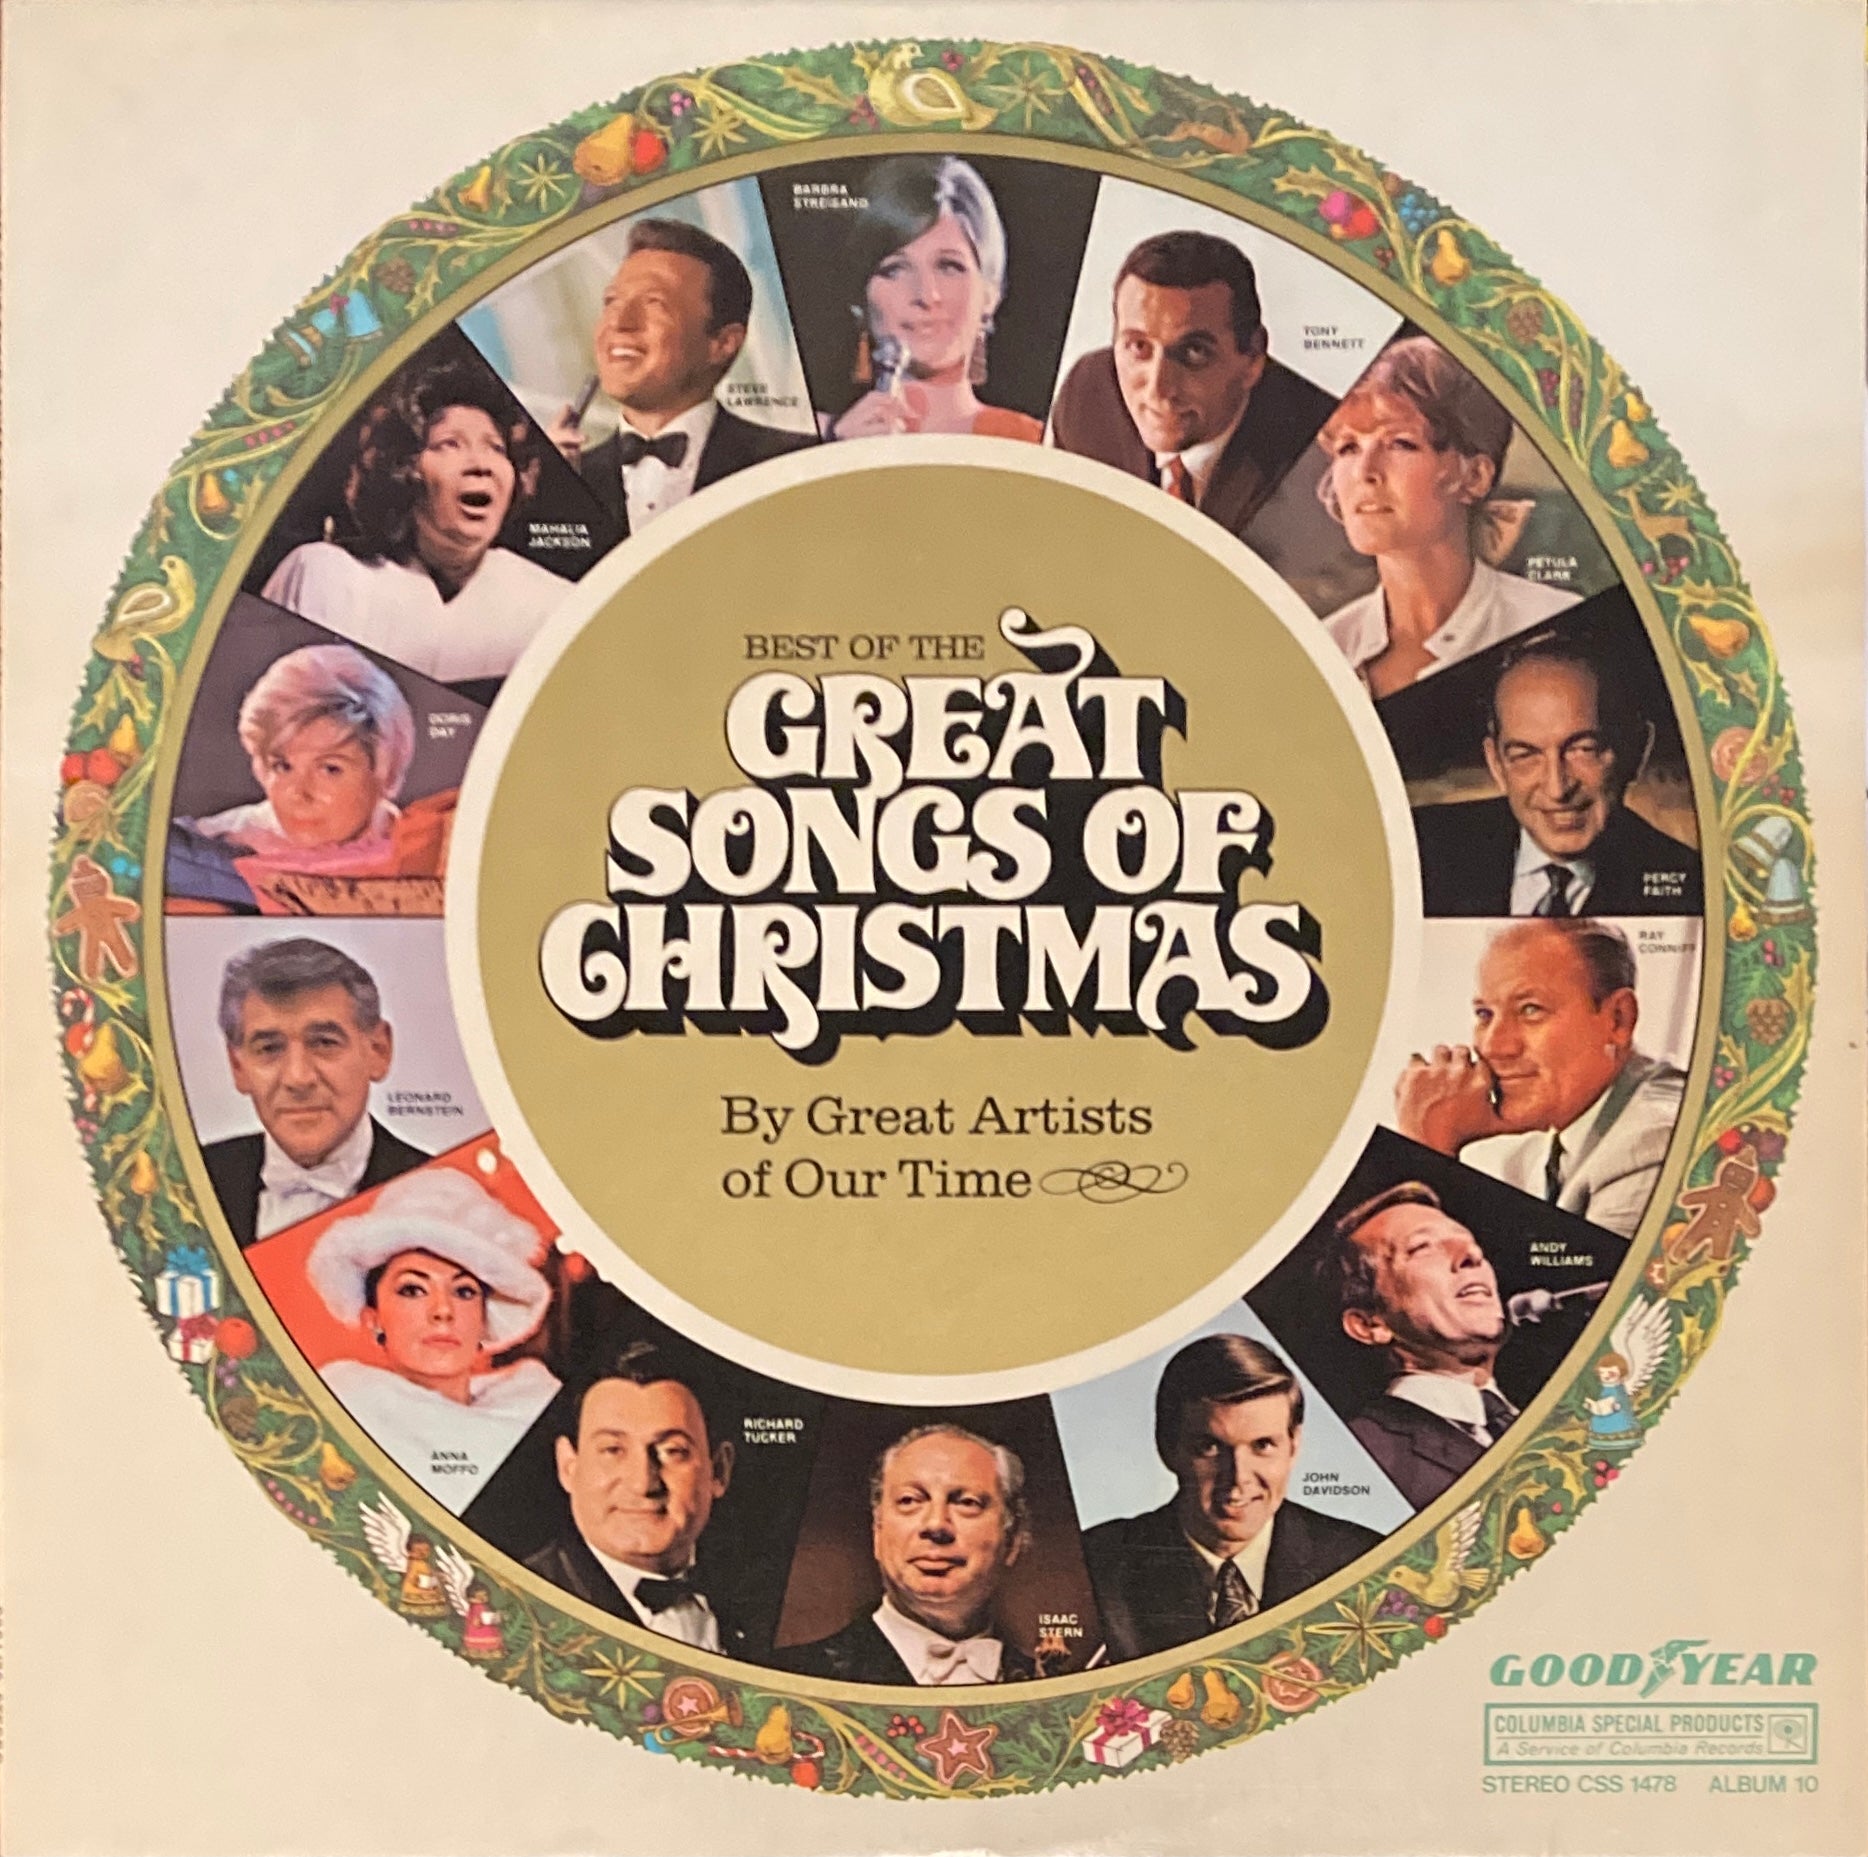 Various Artists "Goodyear: Best Of The Great Songs Of Christmas" LP (1970)